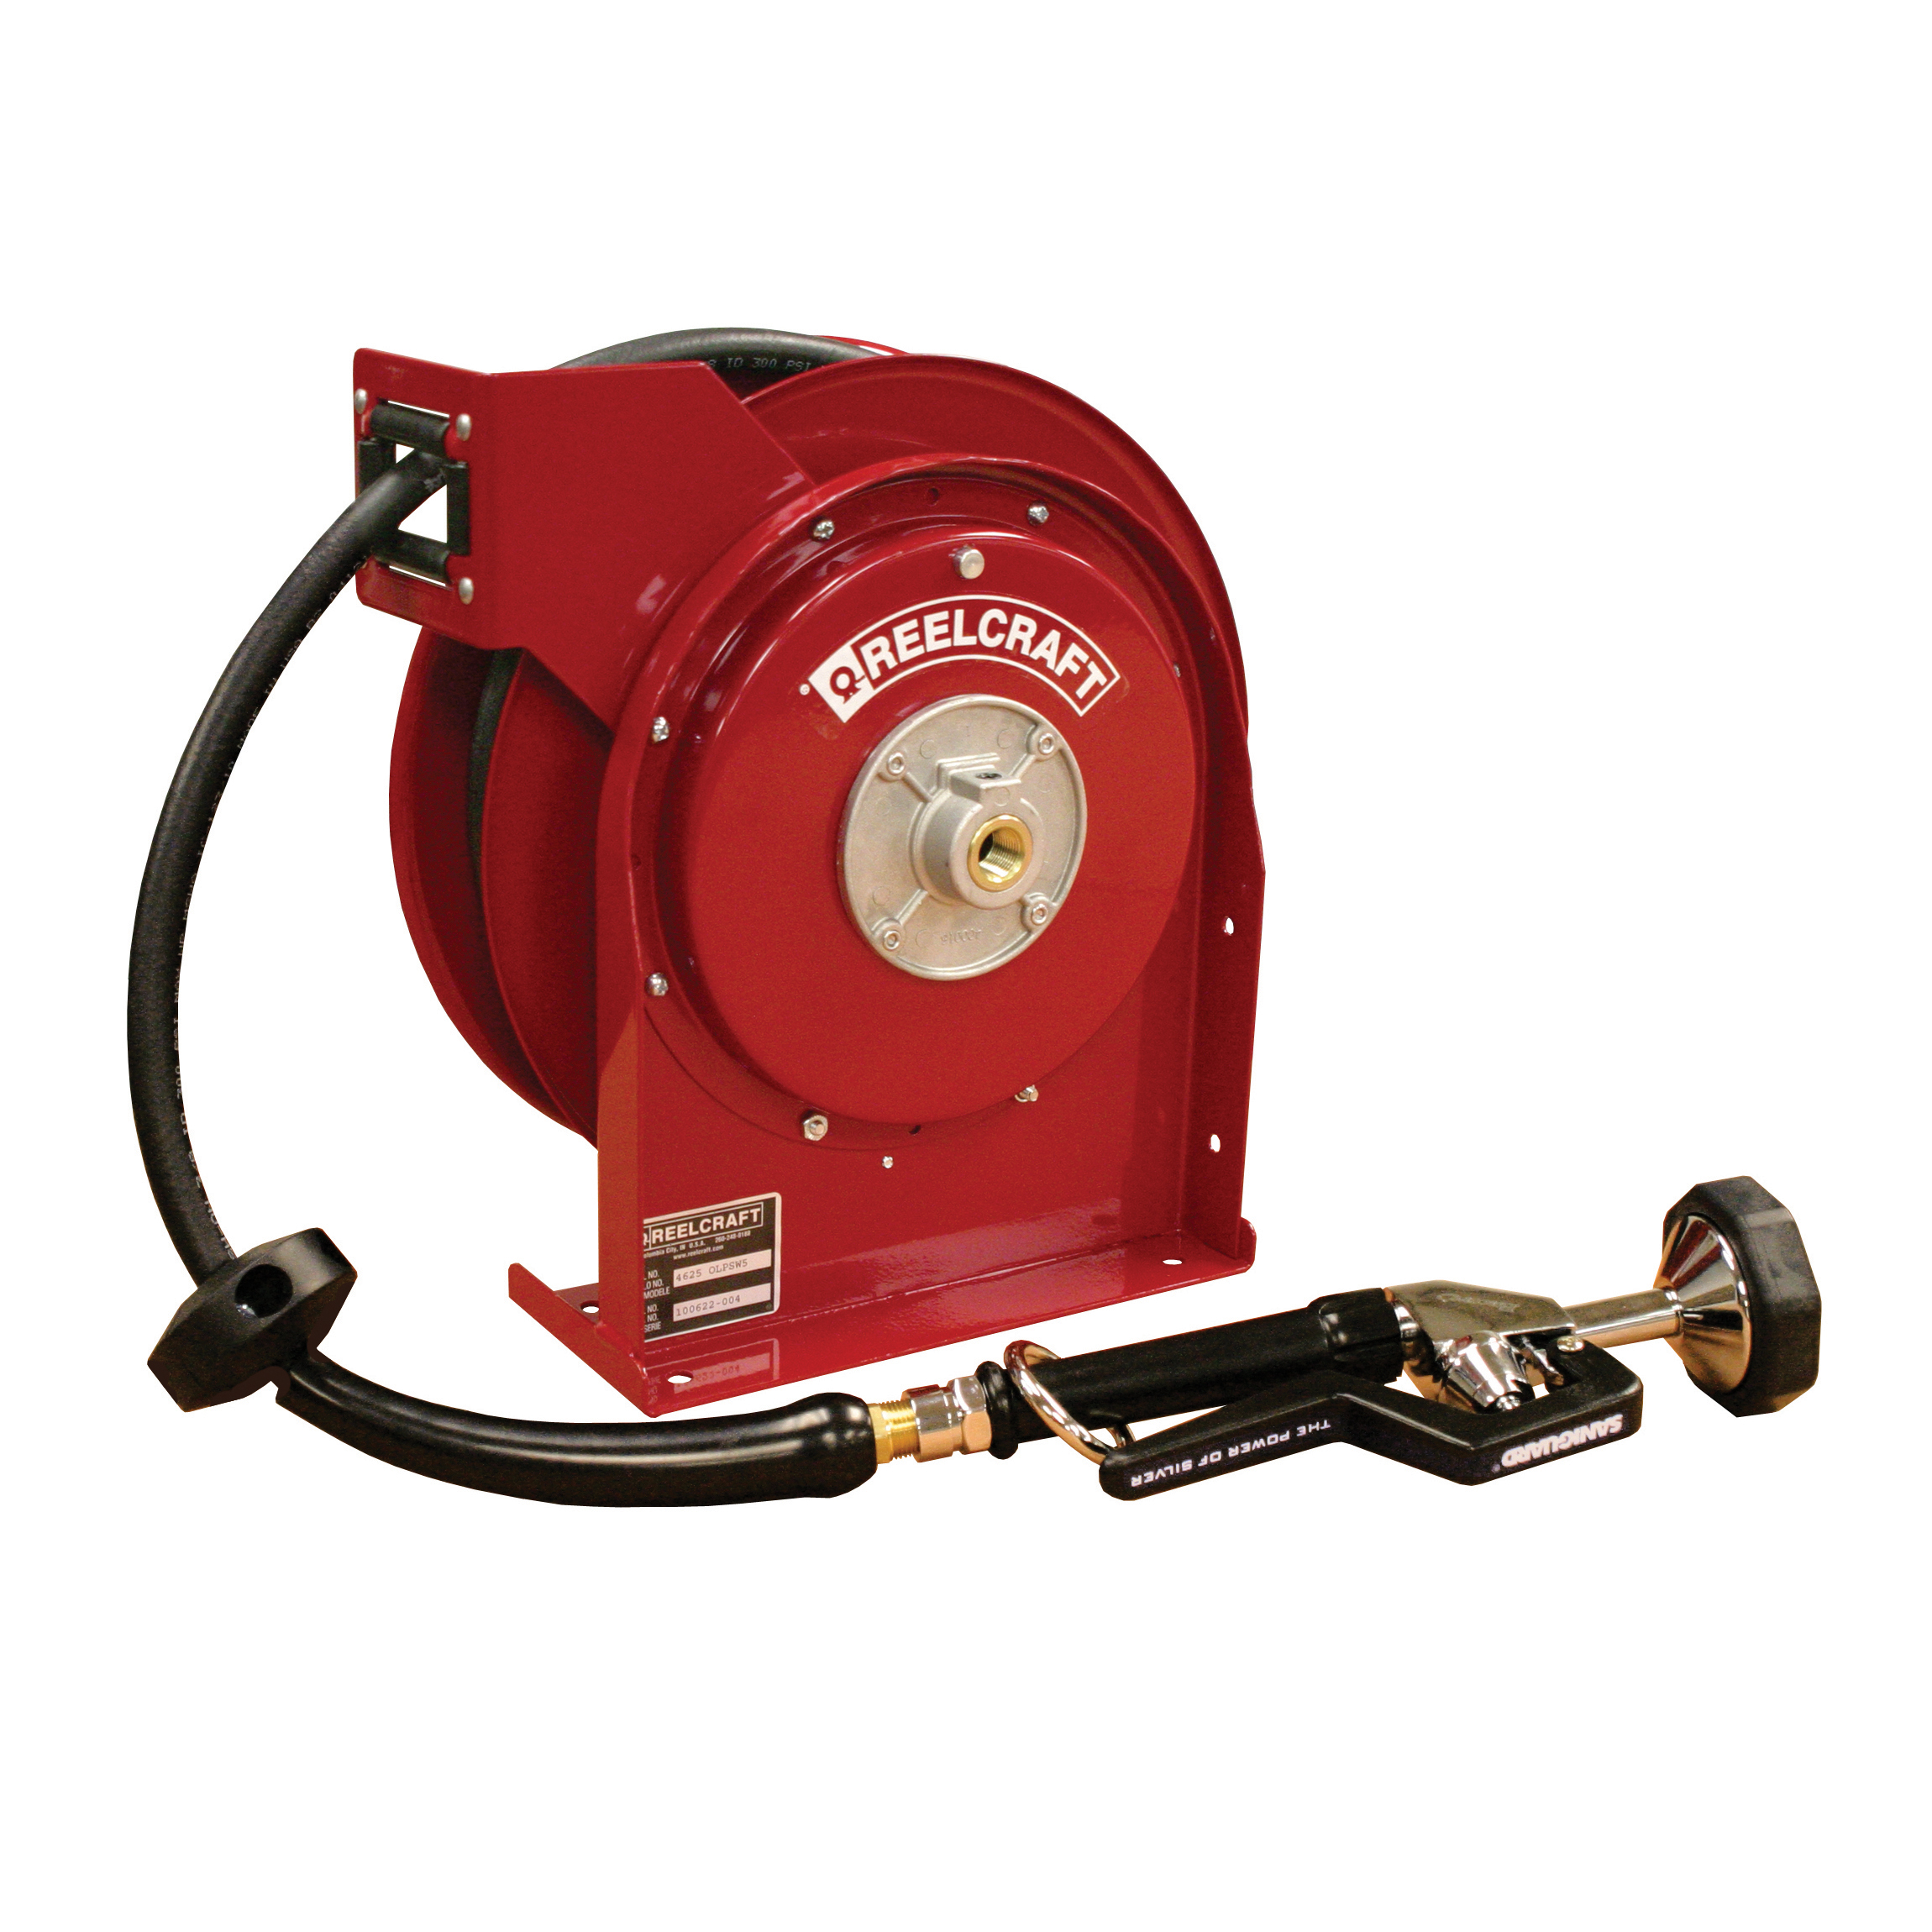 Reelcraft® 4625 OLP 4000 Low Pressure Premium Duty Hose Reel With Hose, 3/8 in ID X 3/5 in OD x 25 ft L Hose, 300 psi Pressure, 12-3/8 in Dia x 2-1/2 in W Reel, Domestic